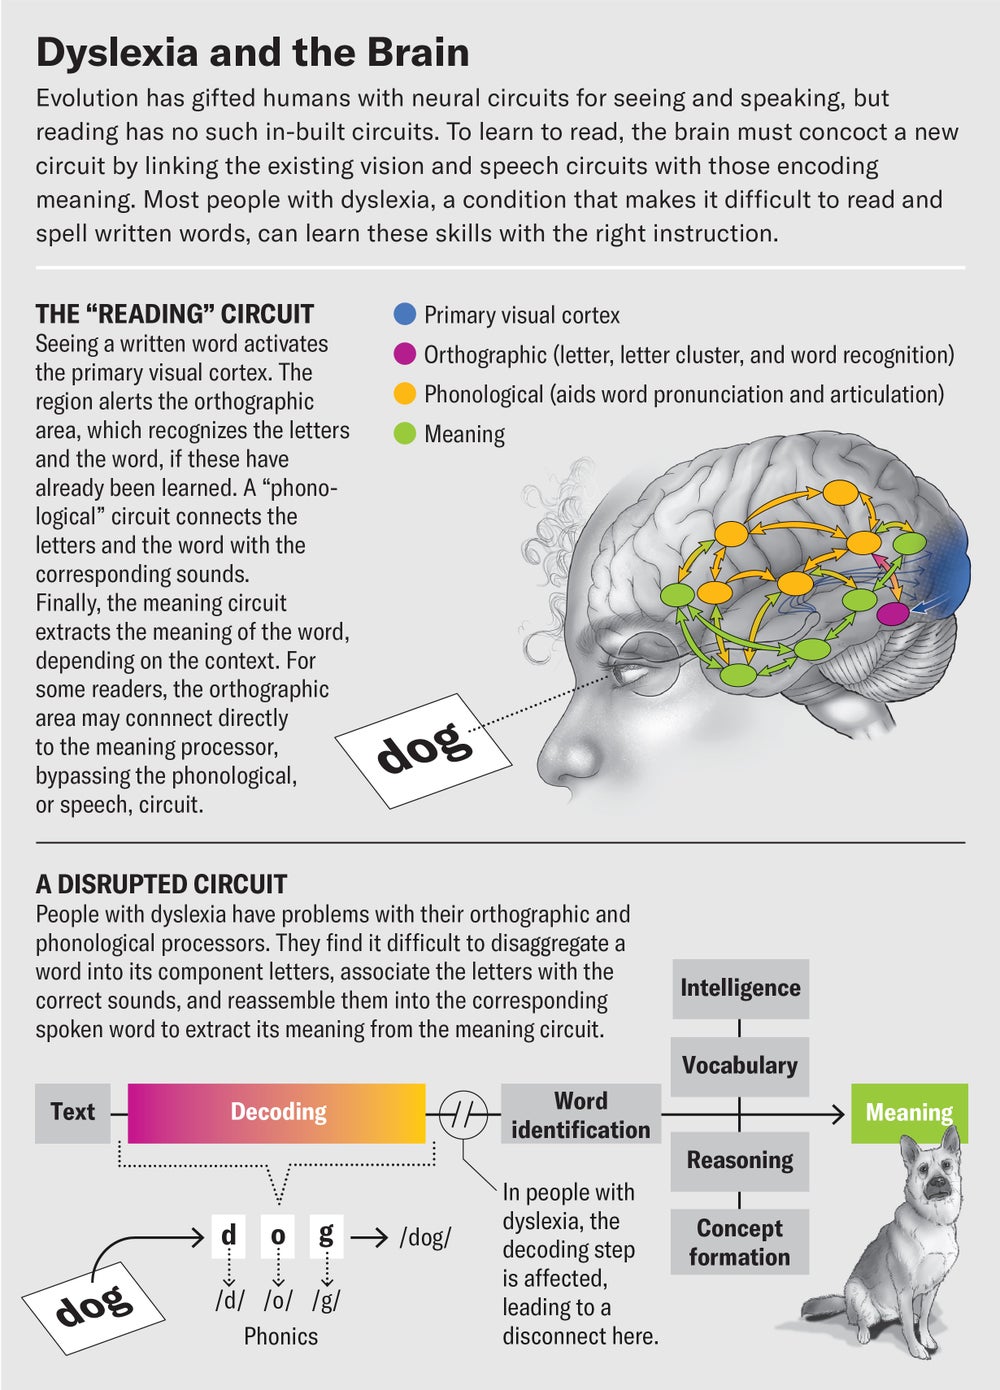 A graphic highlights brain regions involved in the “reading” circuit and shows how dyslexia disrupts the decoding step of the process, making it harder to identify a word and its meaning.